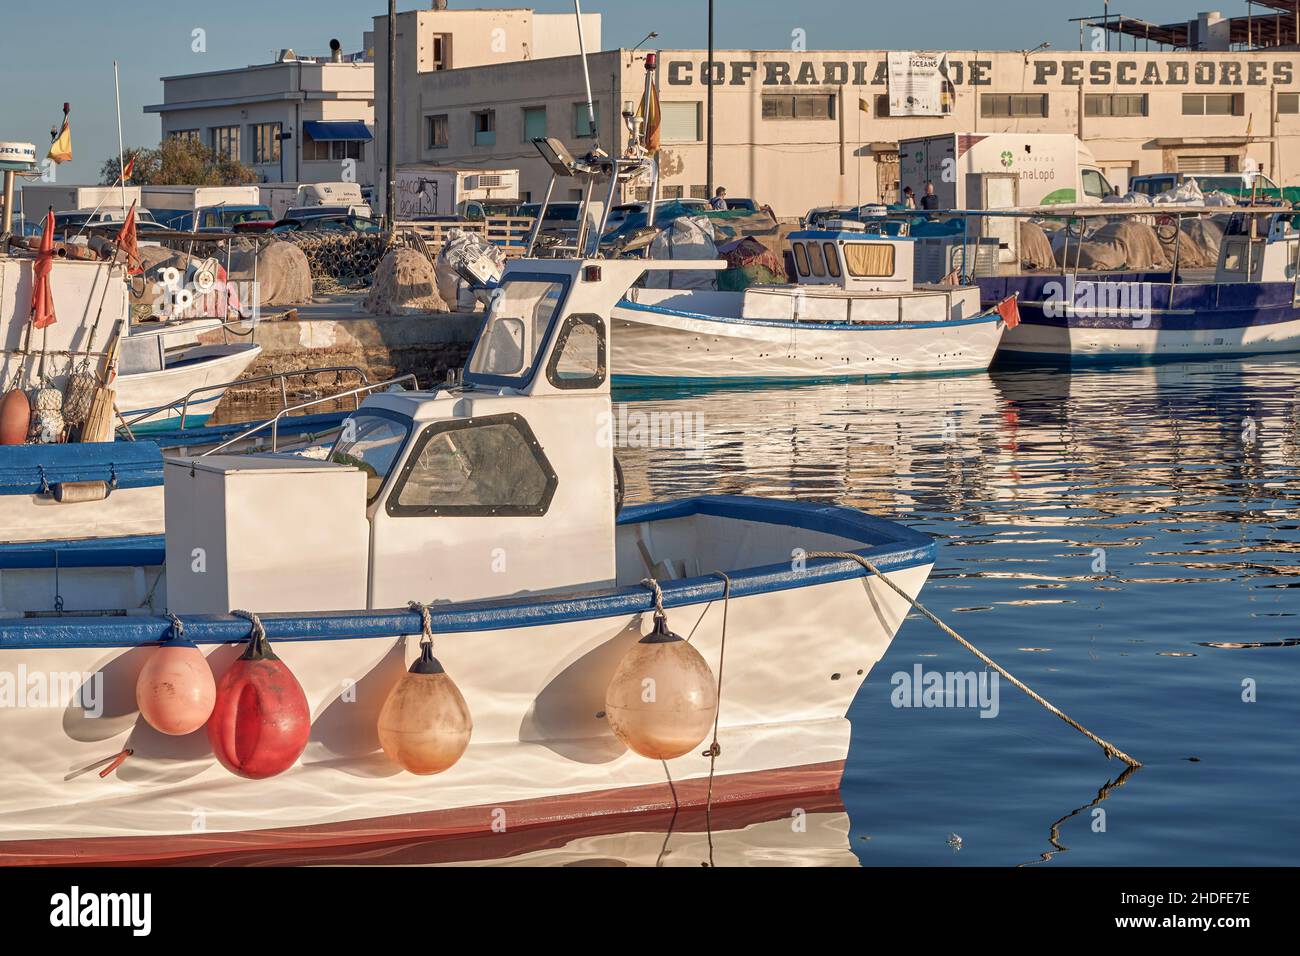 Fishermen's guild with fishing boats in the port of the town of Santa Pola in the province of Alicante, Spain, Europe Stock Photo